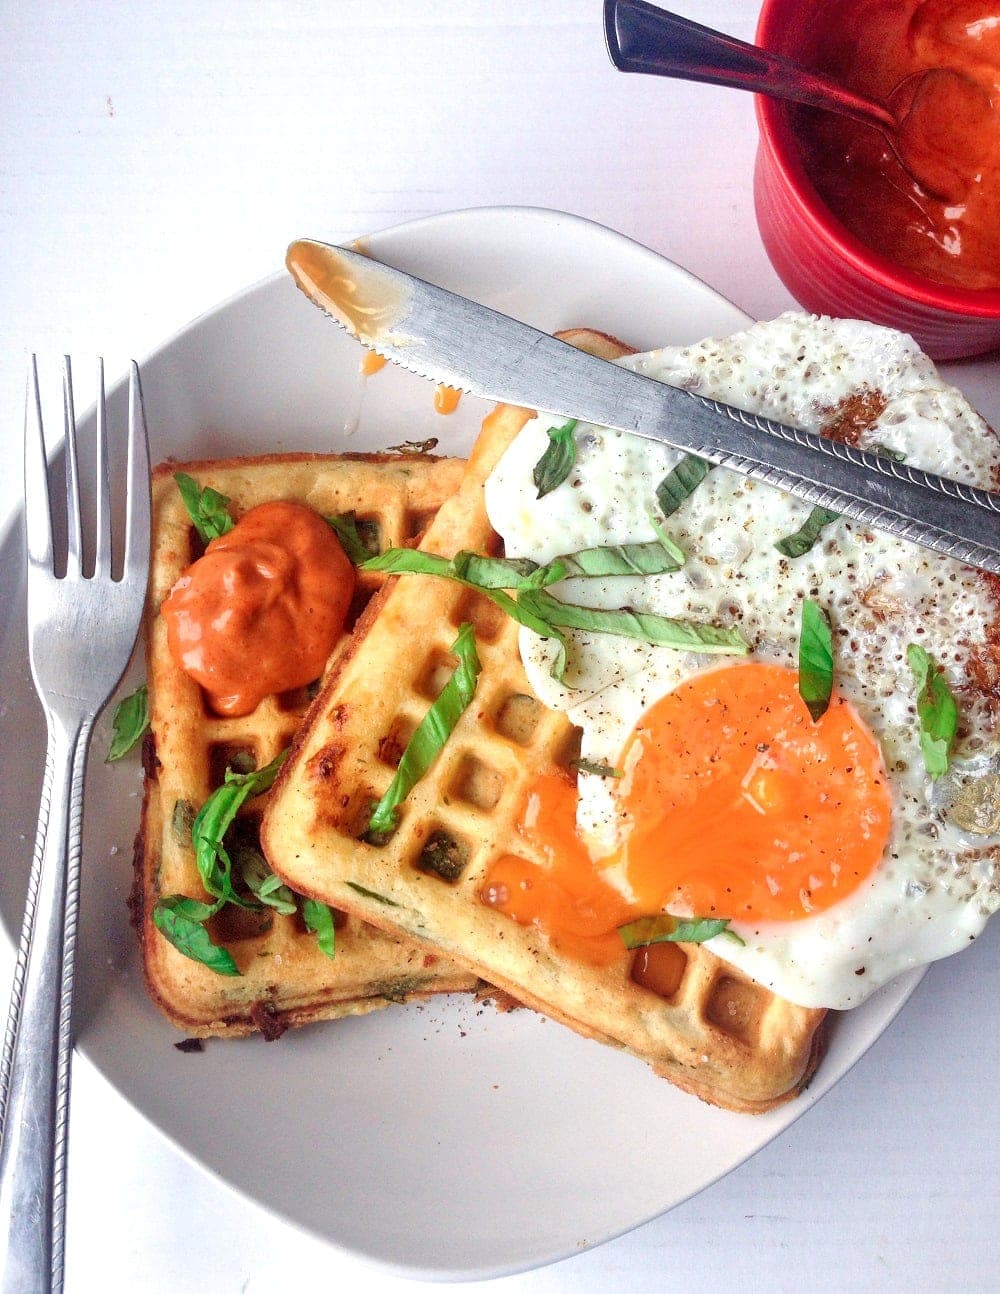 These feta, spinach & chorizo waffles make a perfect meal at any time of day. Top them with a fried egg for a filling breakfast, lunch or dinner.